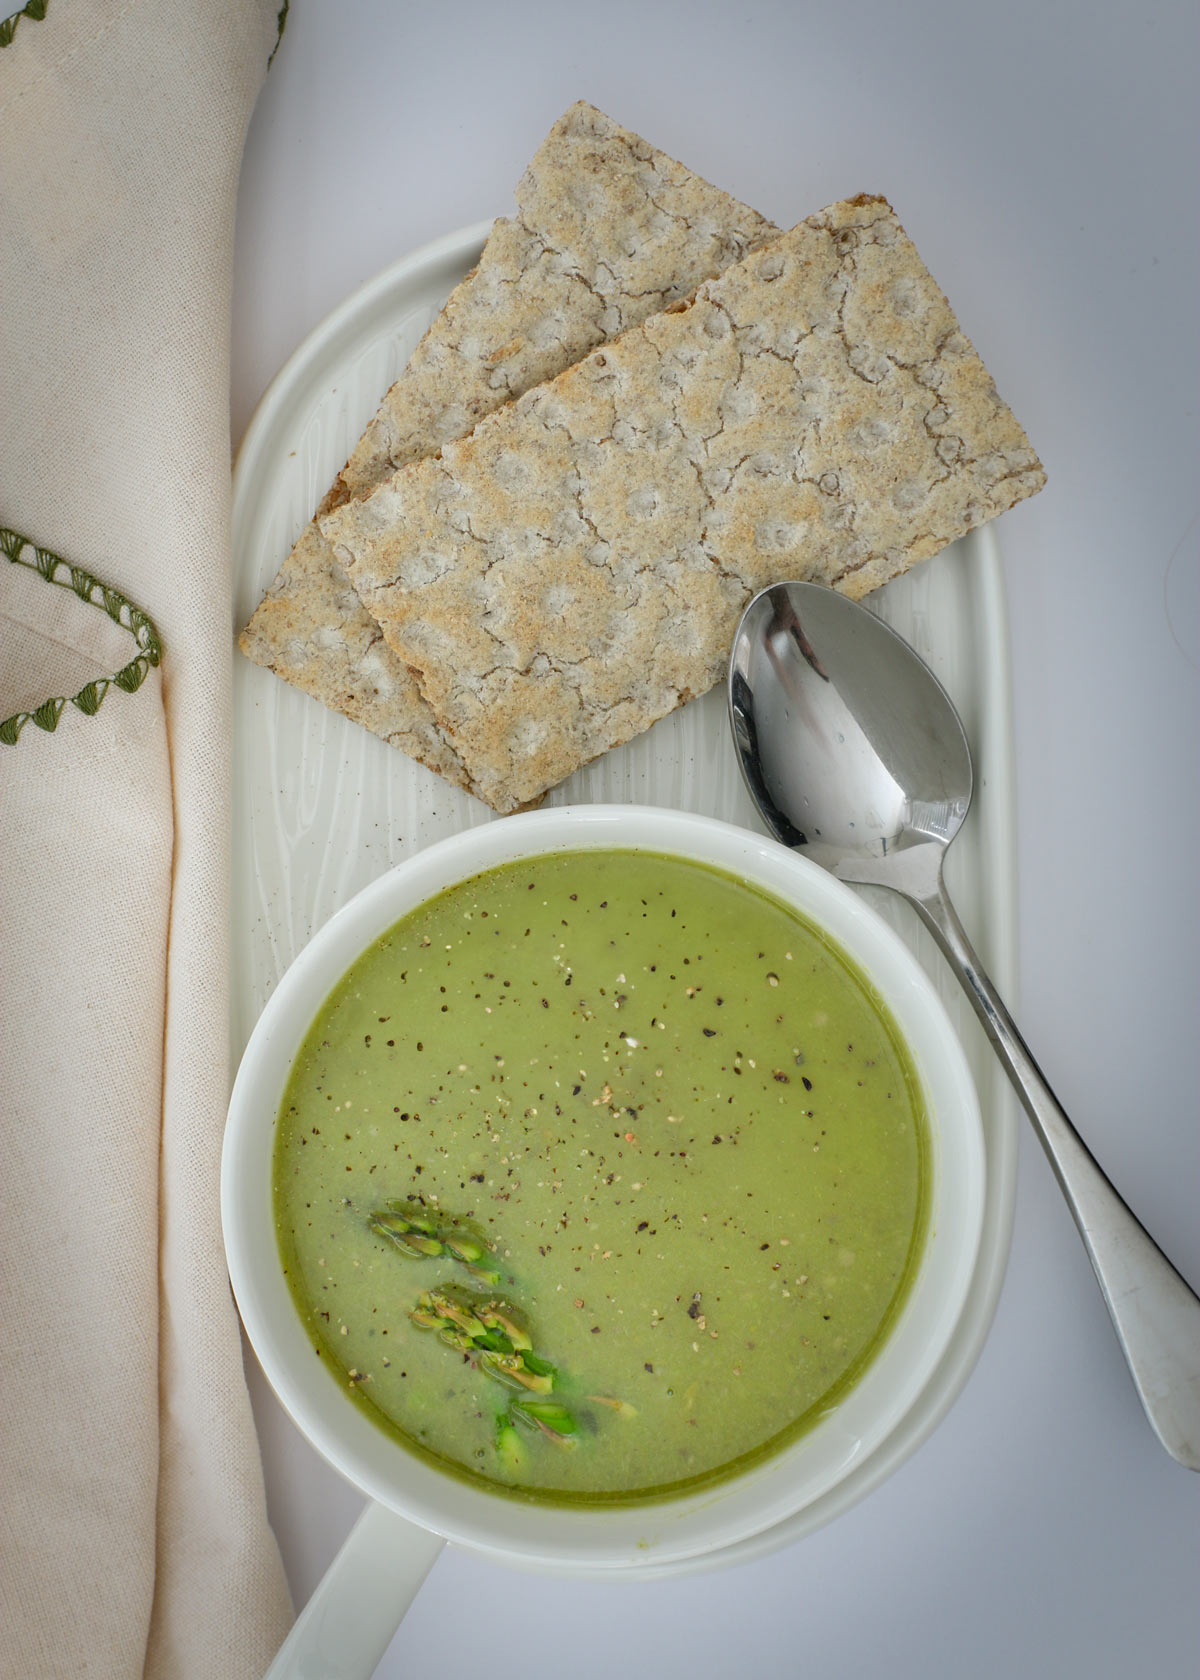 asparagus soup in a white dish with a spoon and crackers on the side with a beige napkin.